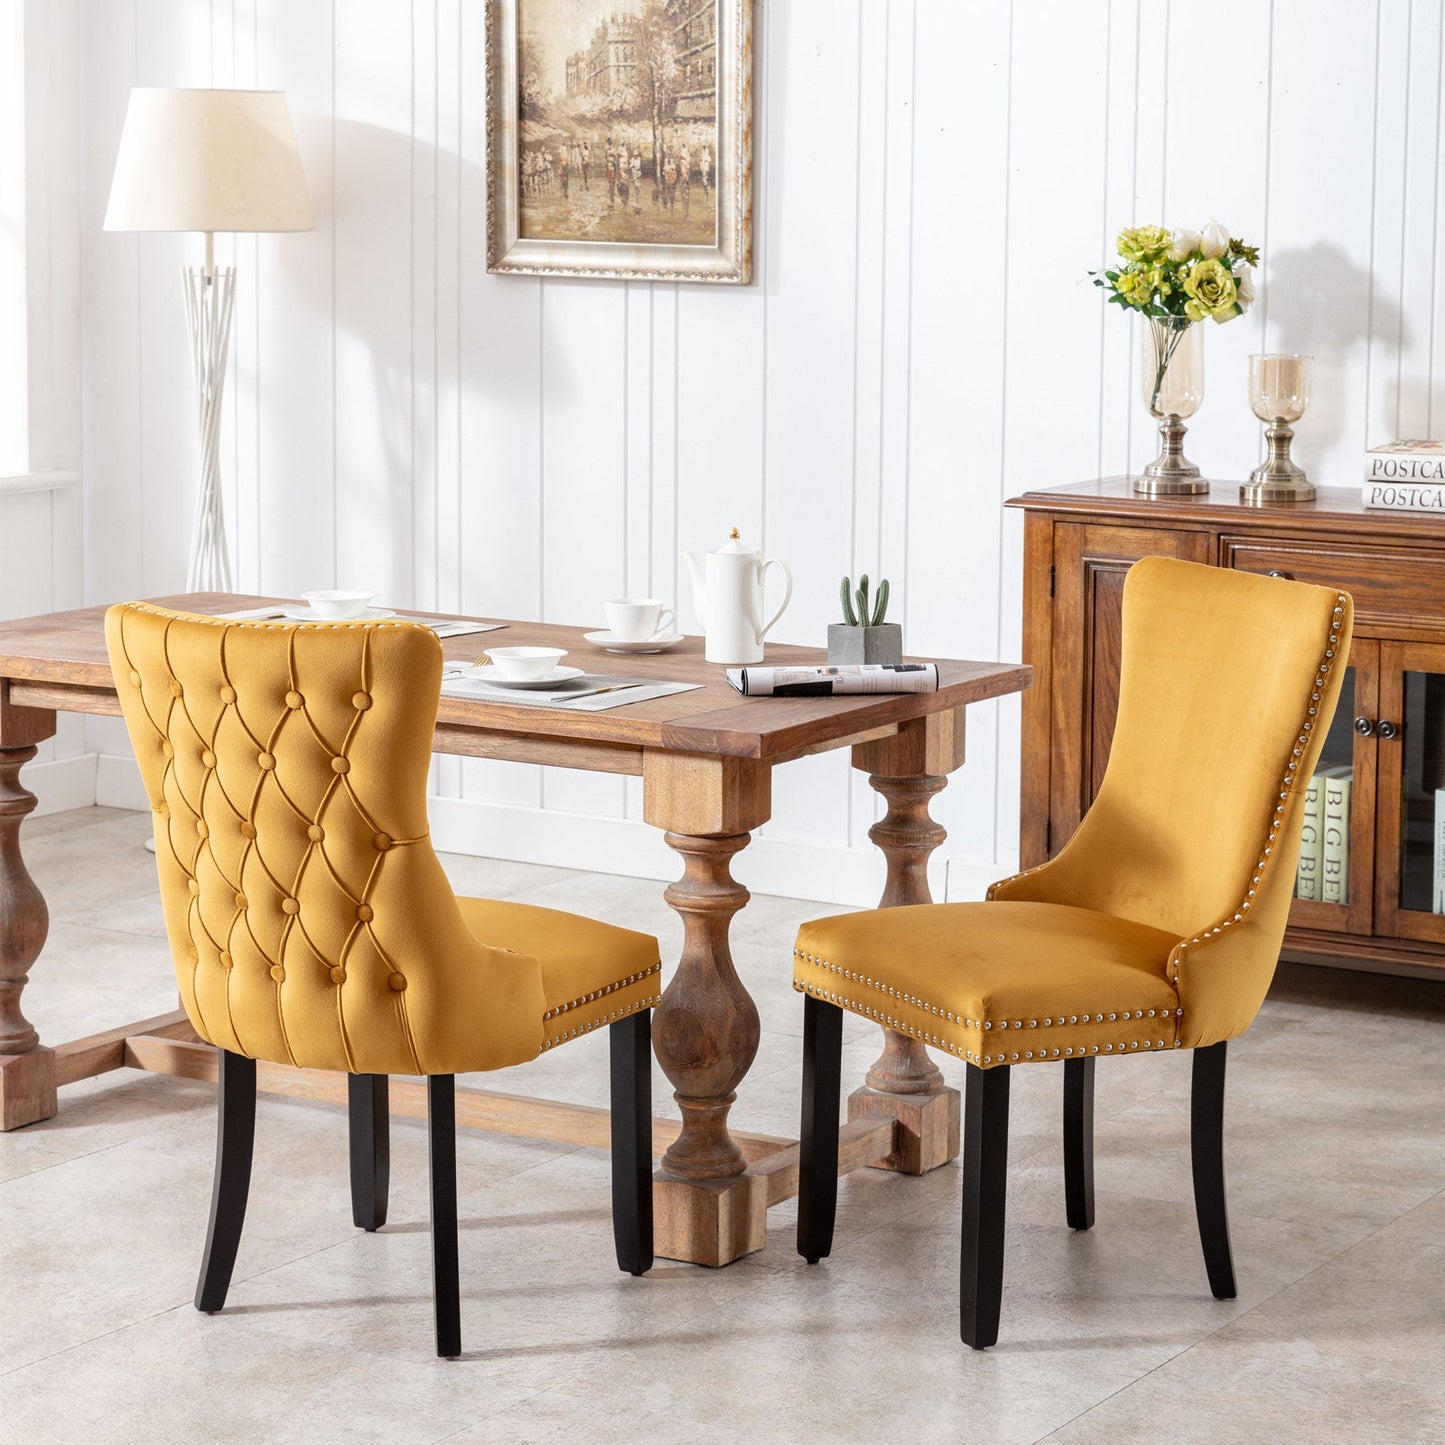 Upholstered Wing-Back Dining Chair with Backstitching Nailhead Trim and Solid Wood Legs,Set of 2, Gold - Demine Essentials